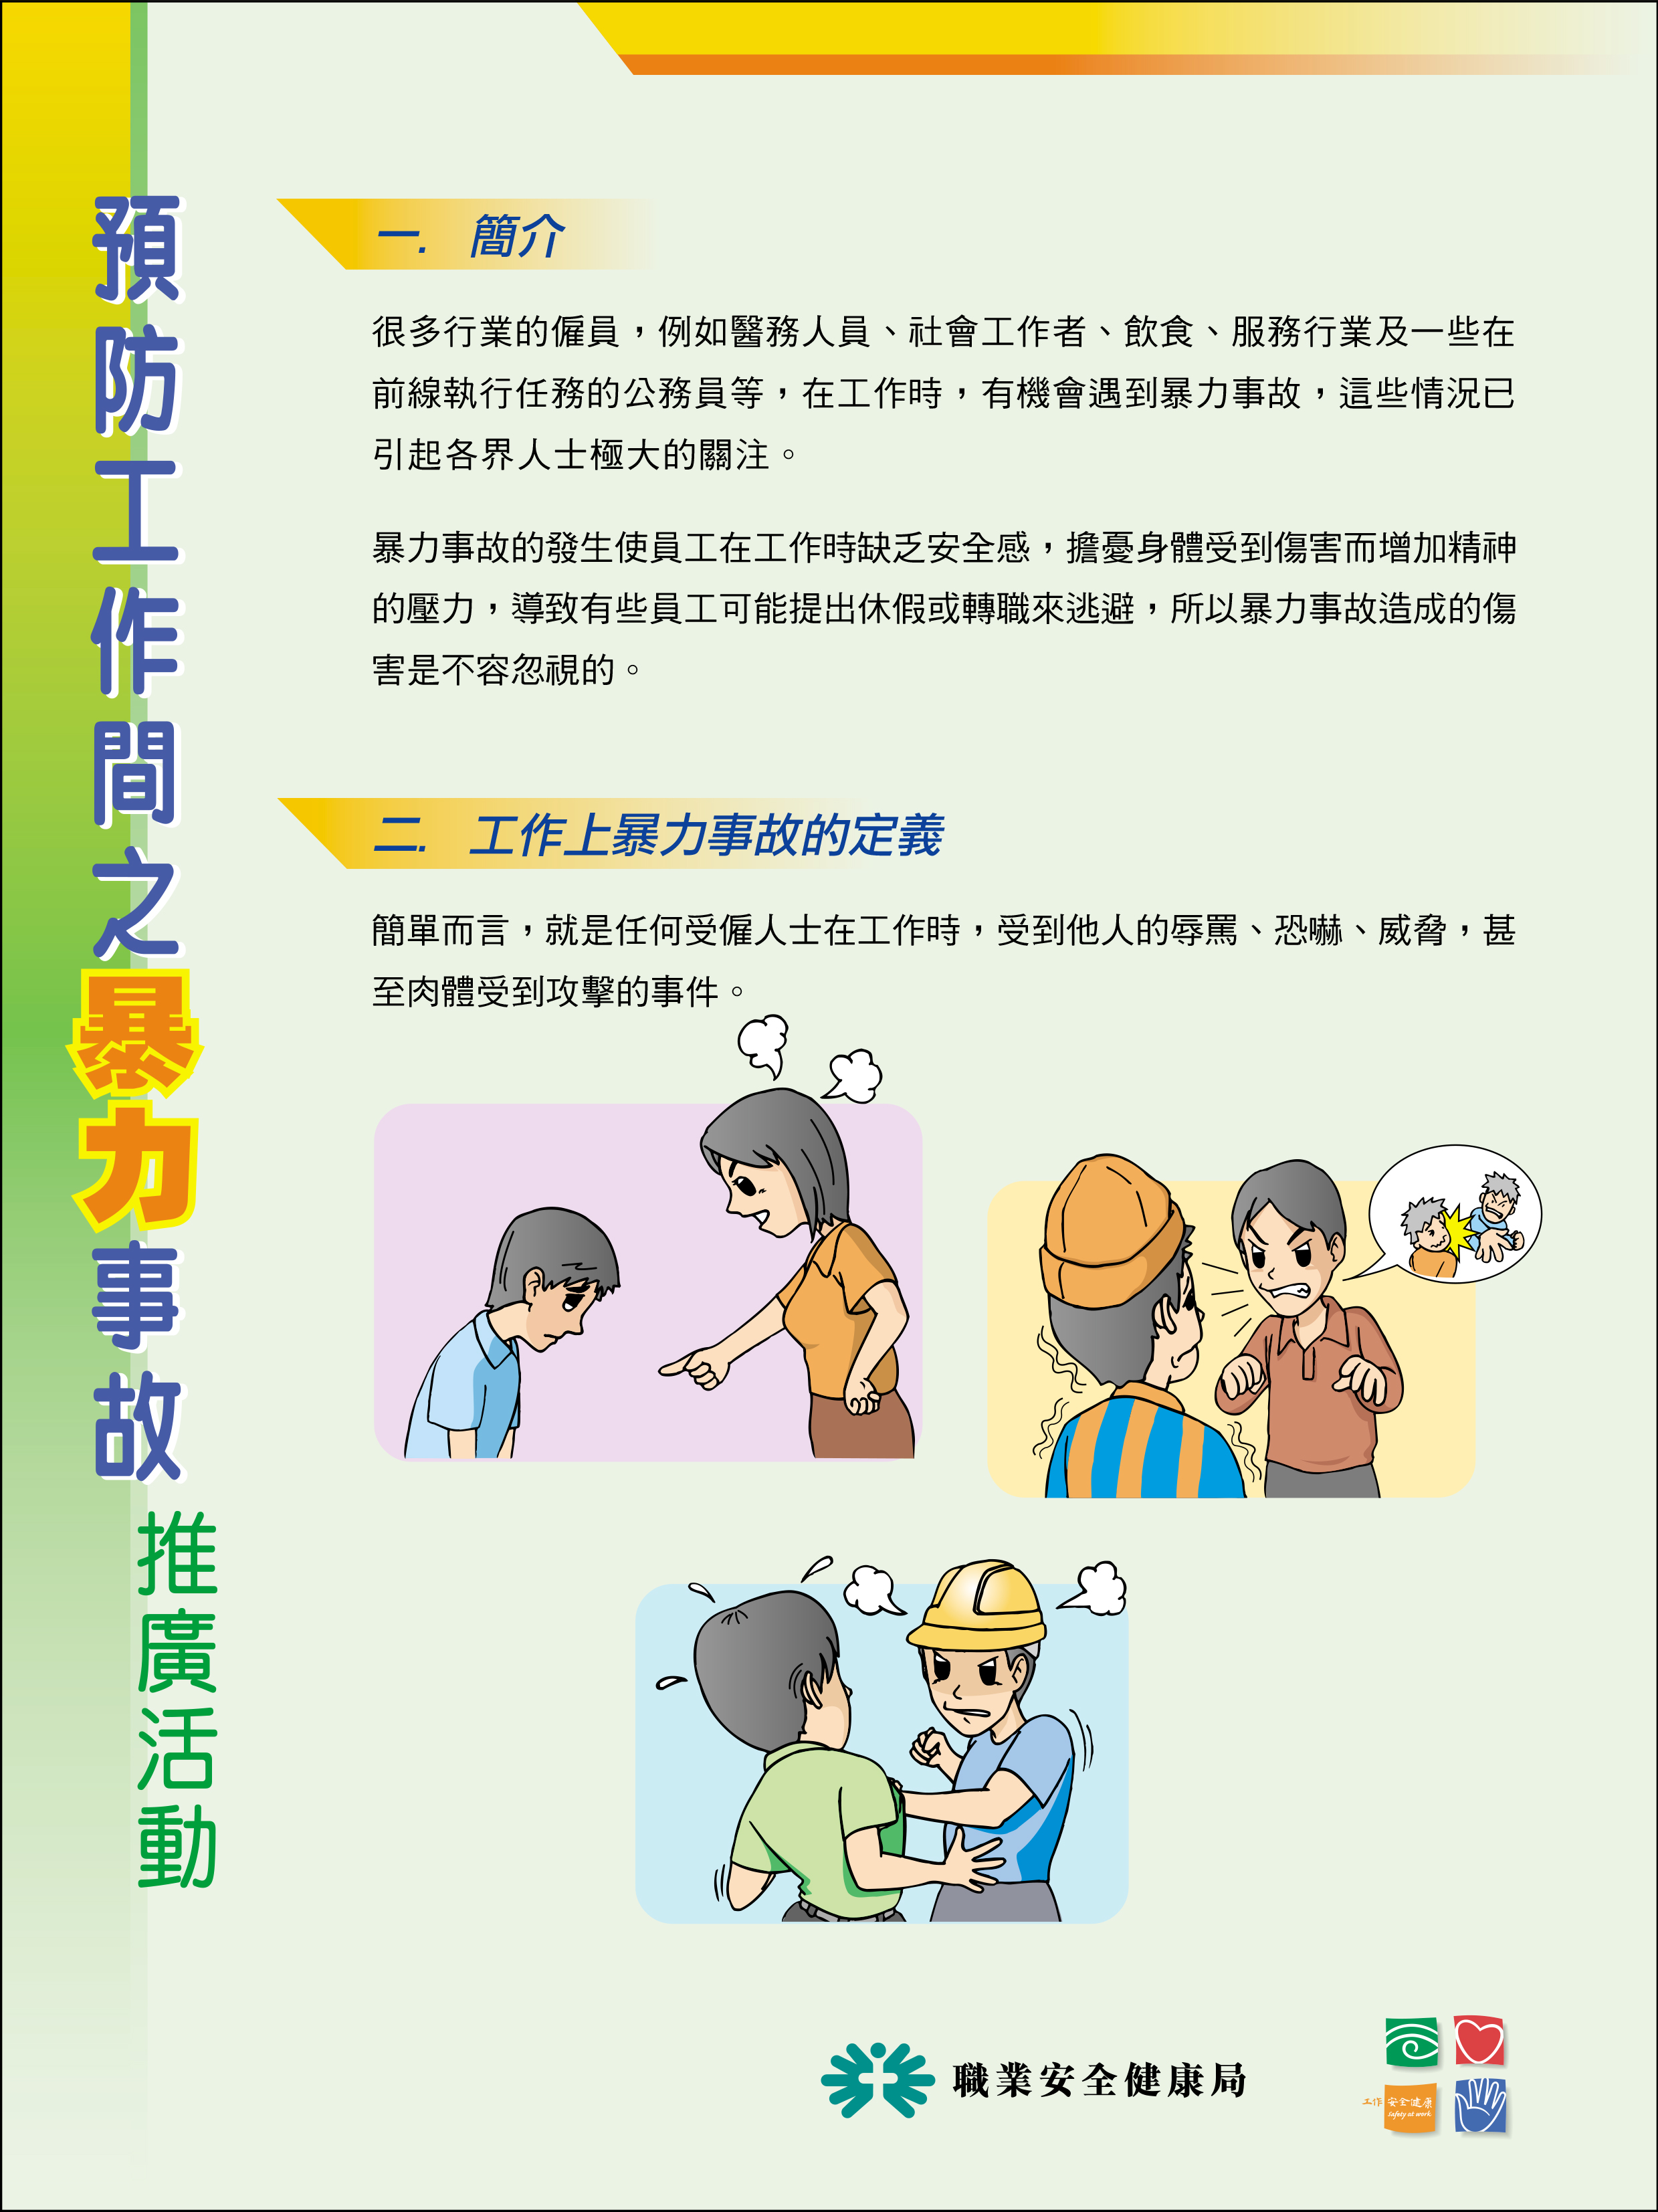 Prevention of Violence at Work (Chinese version only)(published by OSHC)